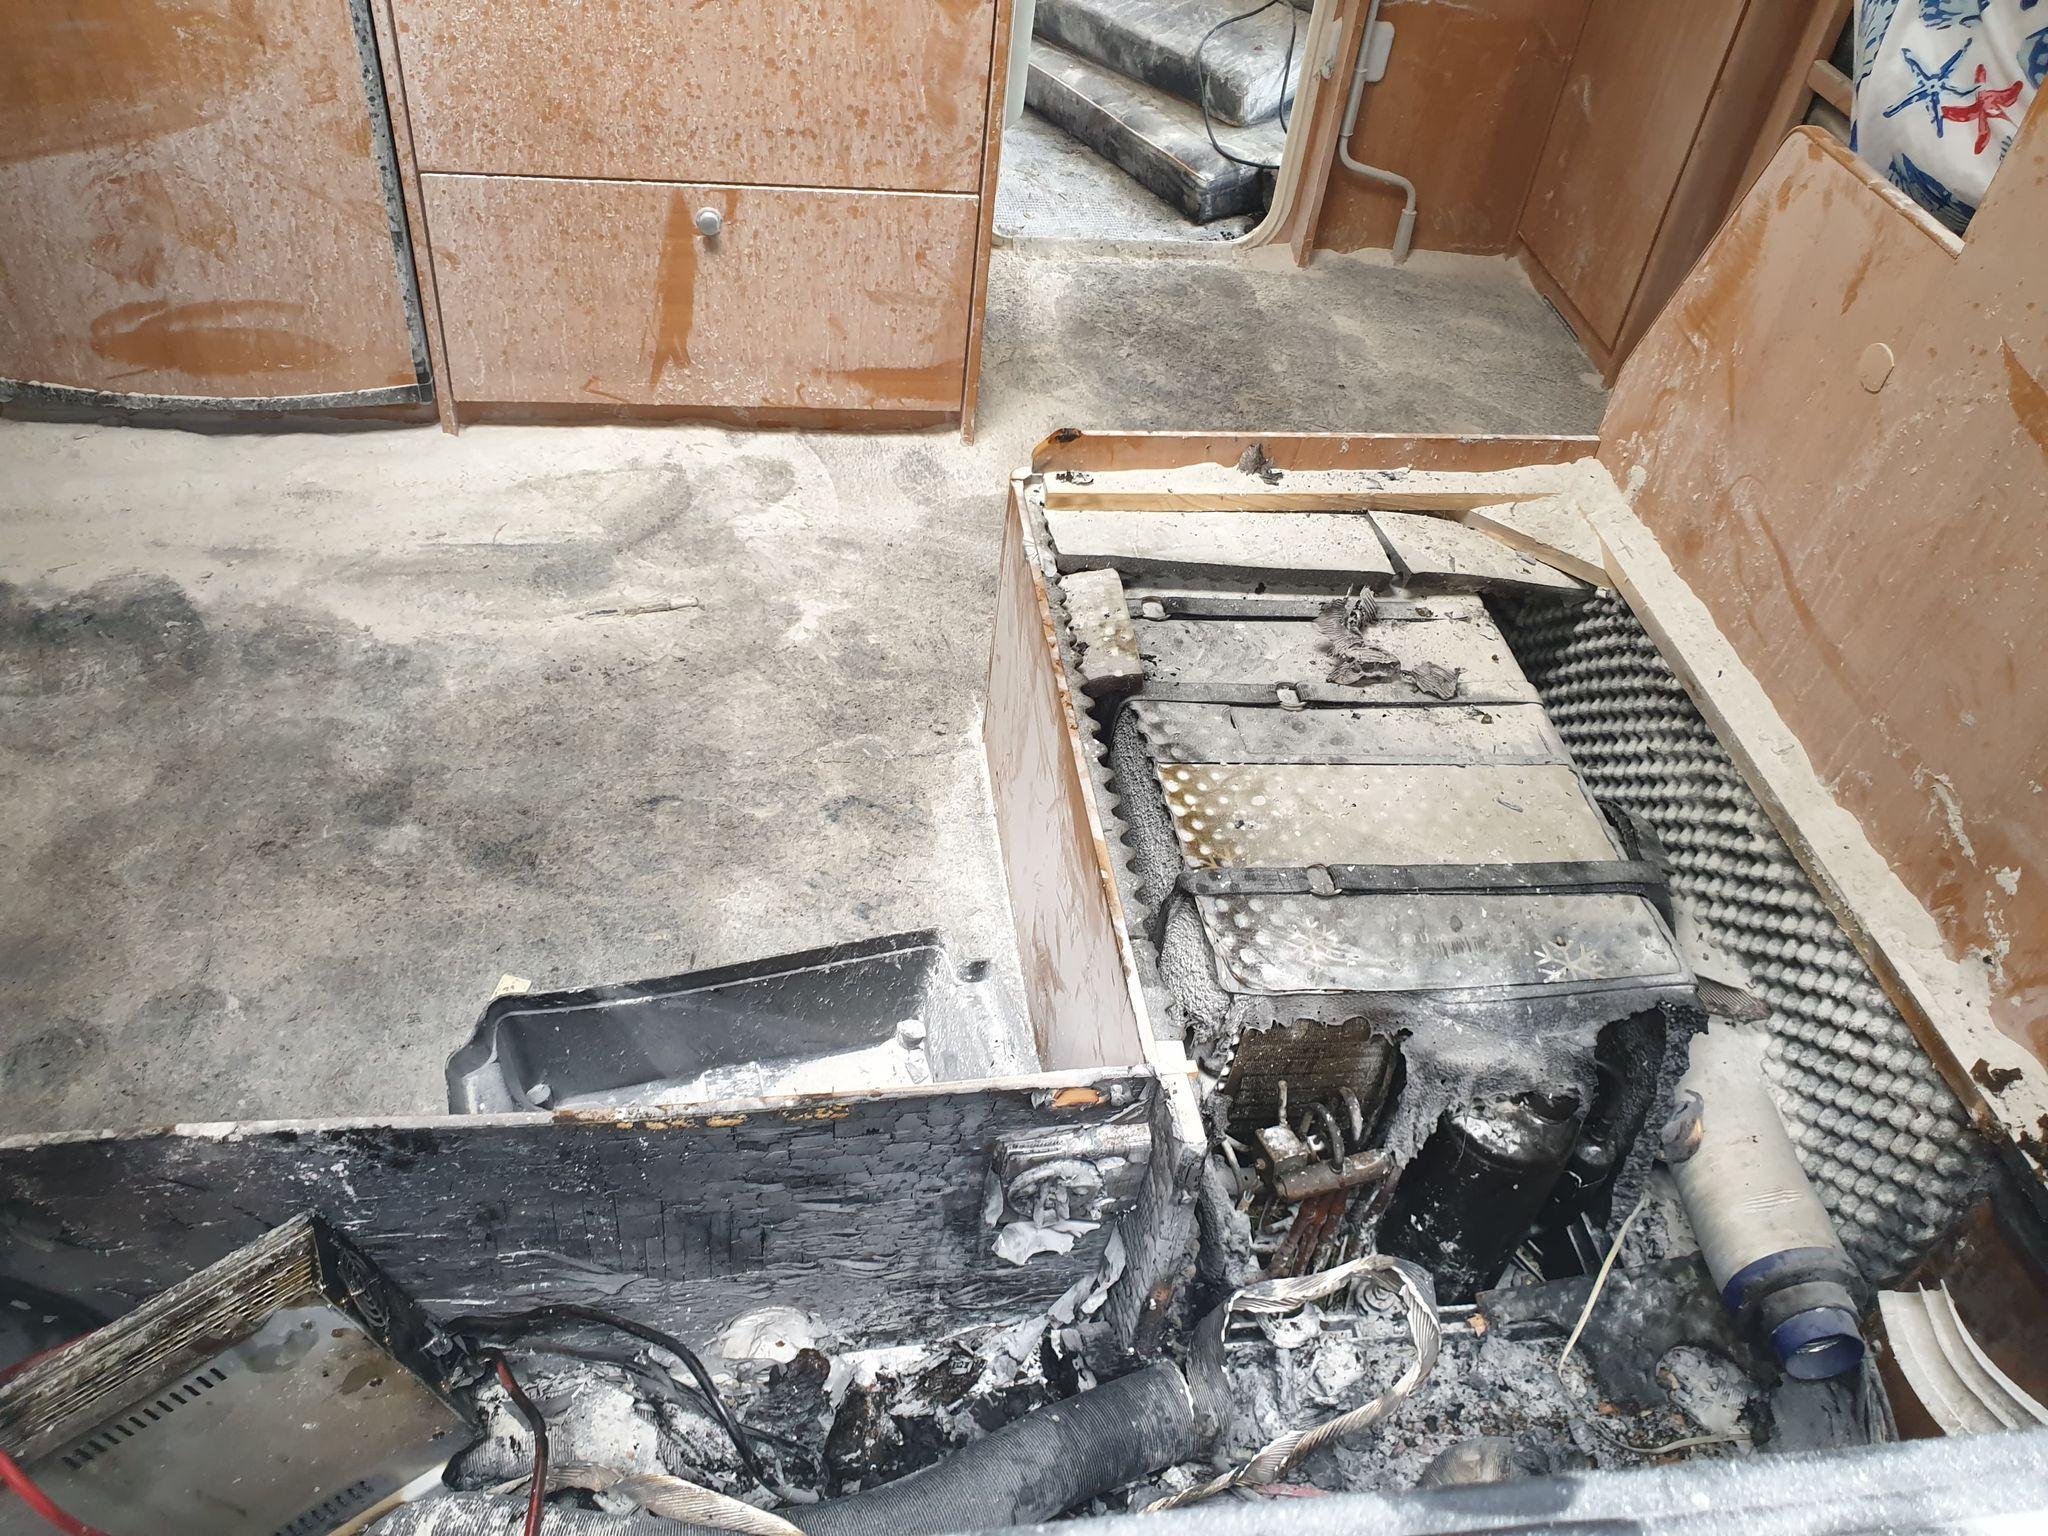 A fire in a caravan or motorhome - a trauma for life – image 2